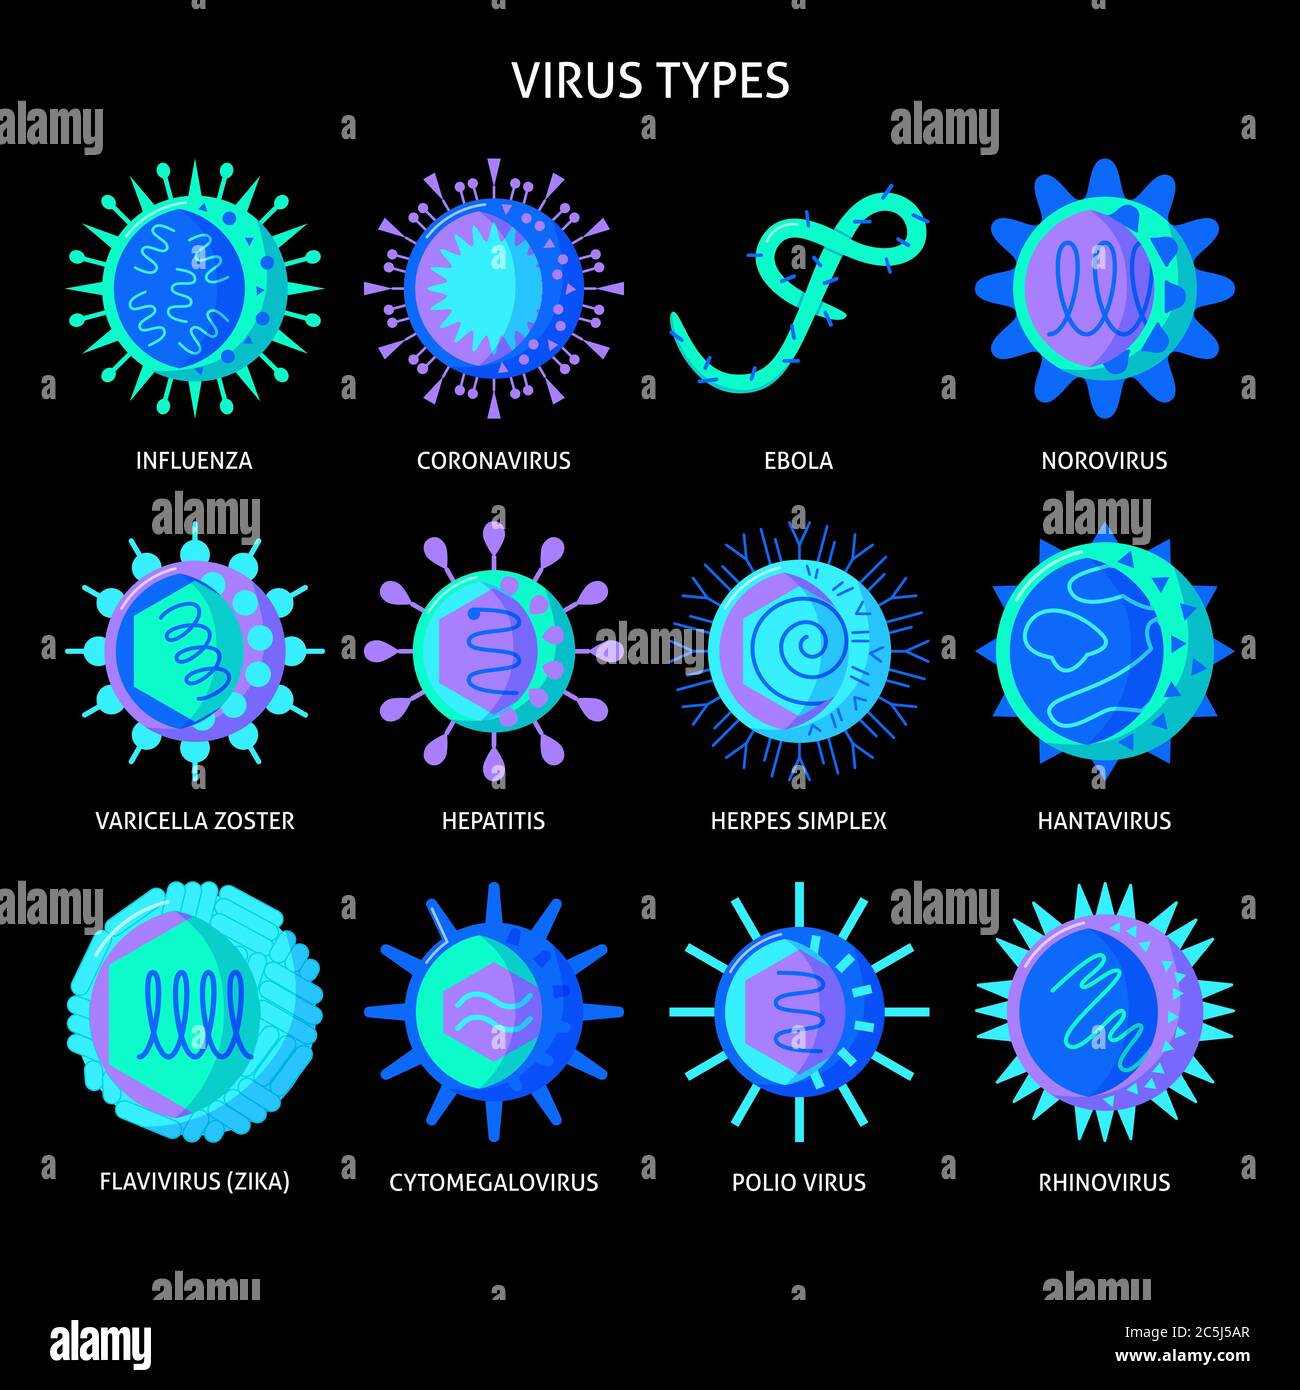 Virus types icon set in flat style on dark background. Infection cells symbols collection. Human viruses vector illustration. Stock Vector